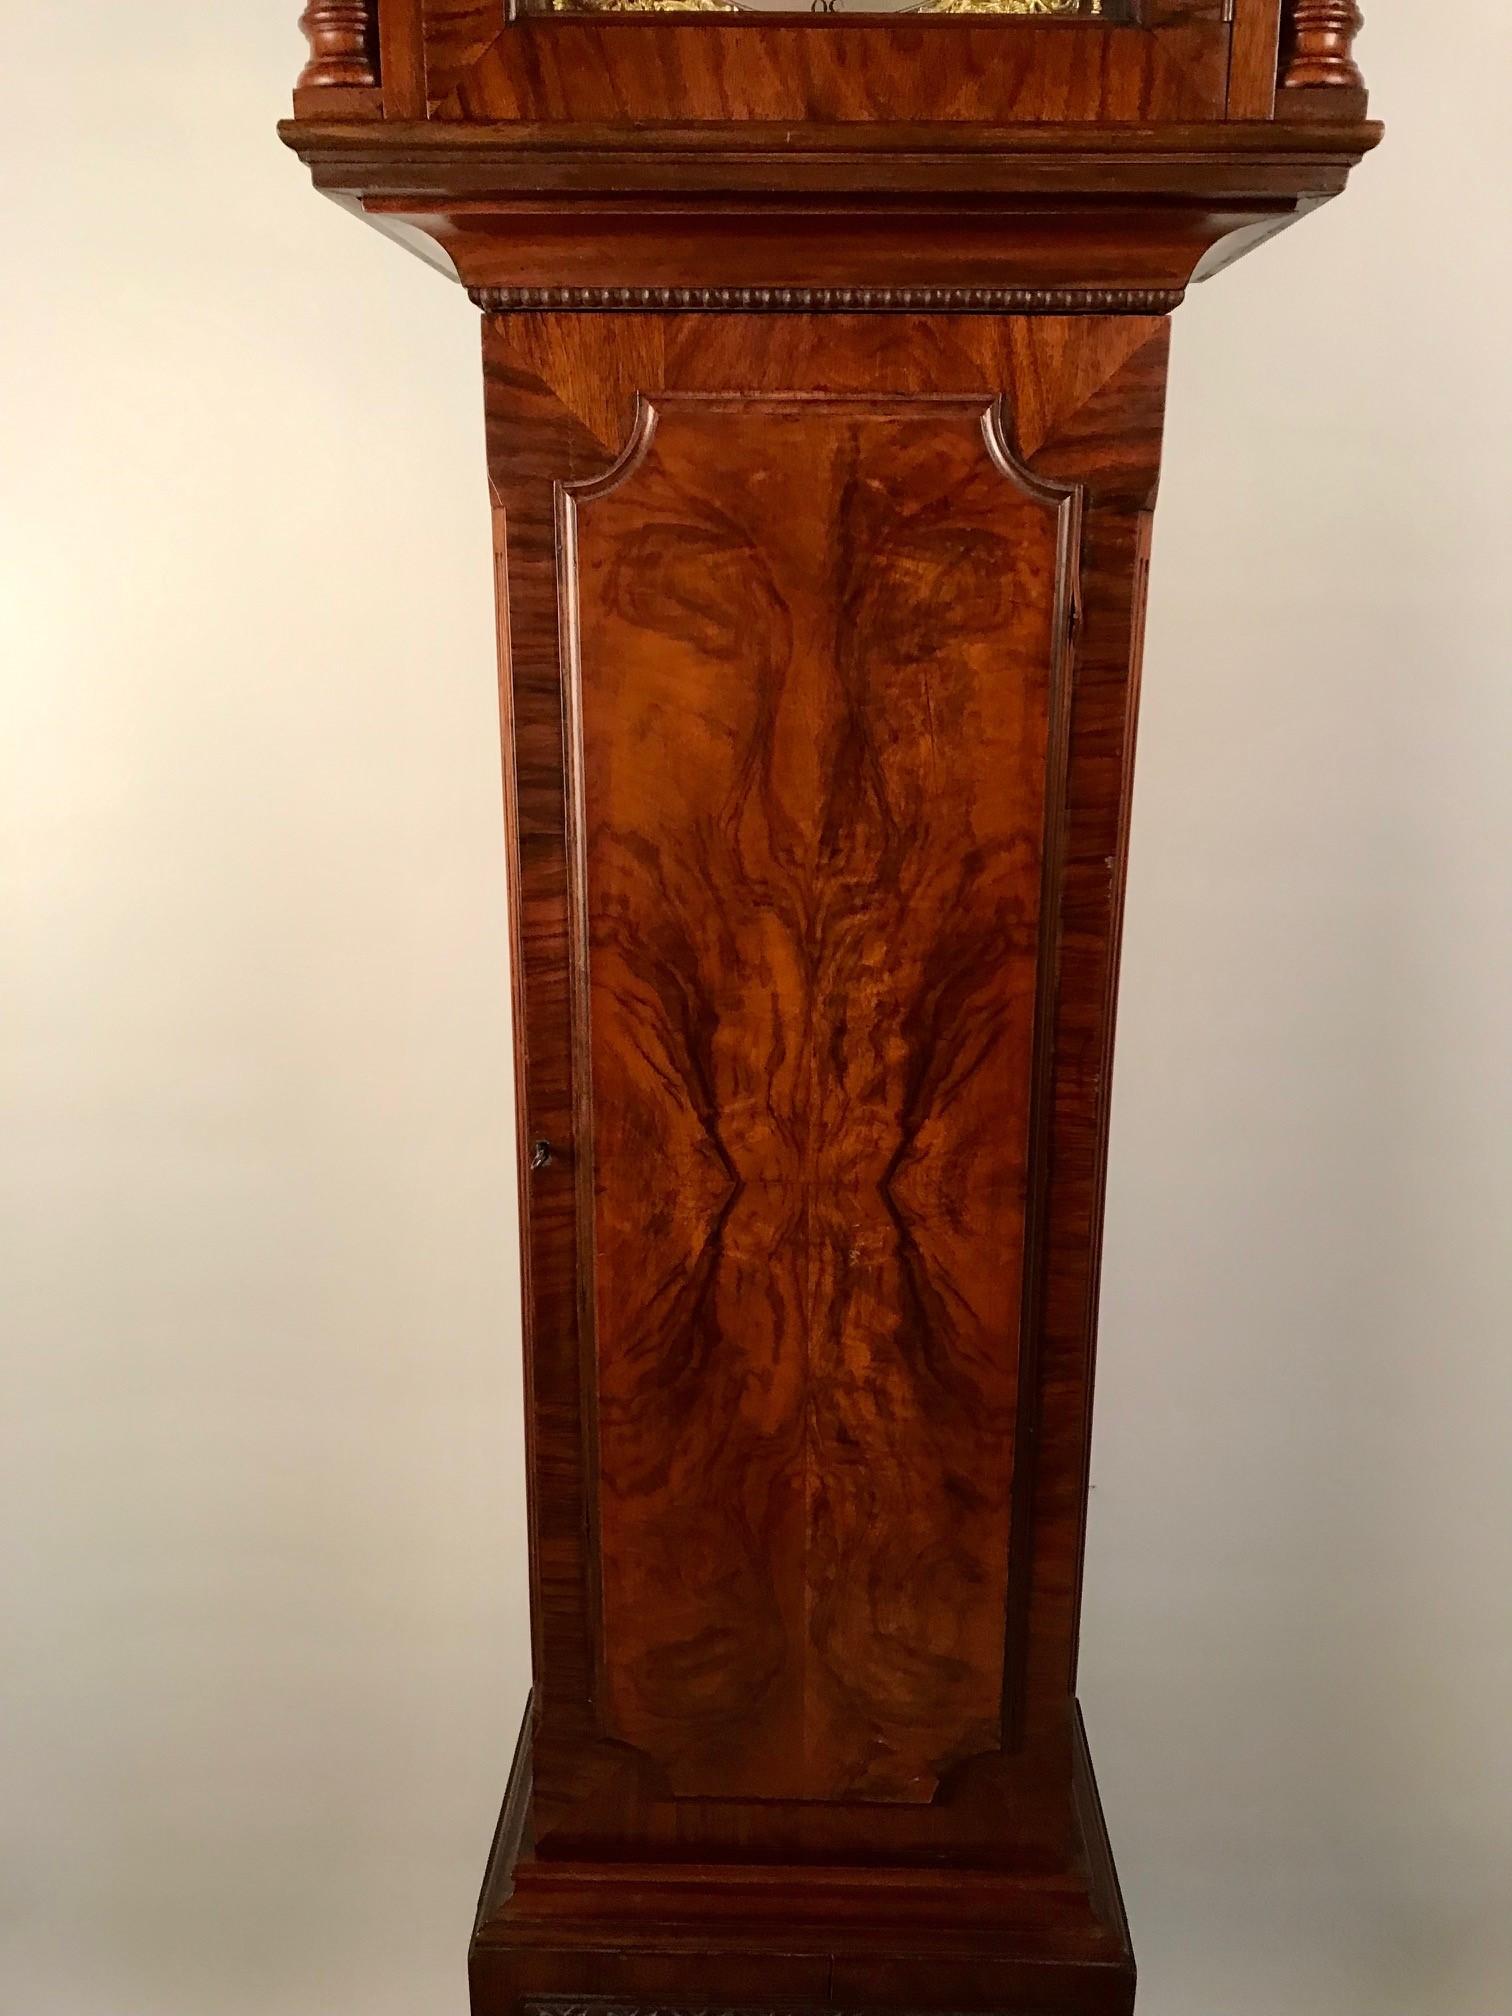 Westminster Chiming Grandmother Clock in a Mahogany Case In Good Condition For Sale In Montreal, QC